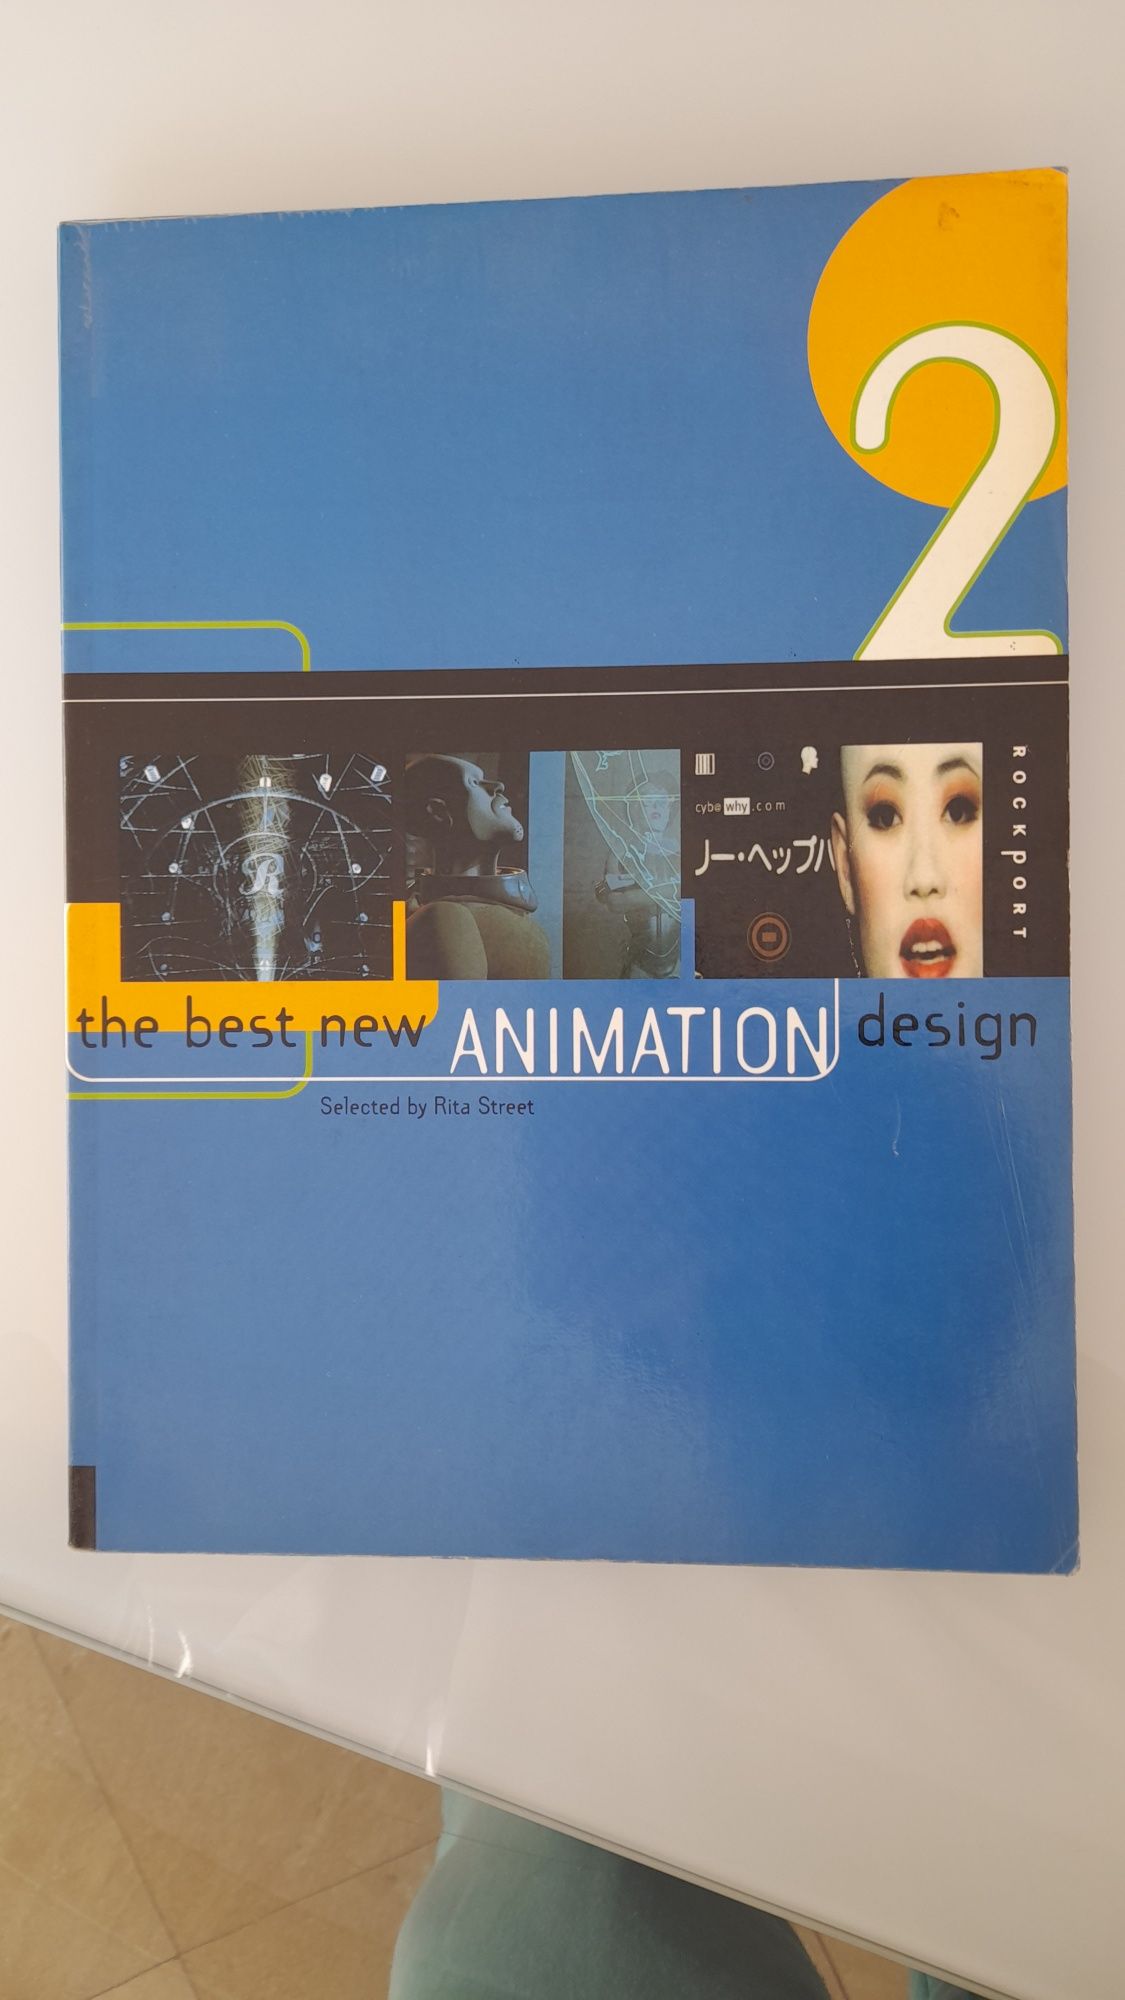 Livro The best new animation design 2 selected by Rita Street